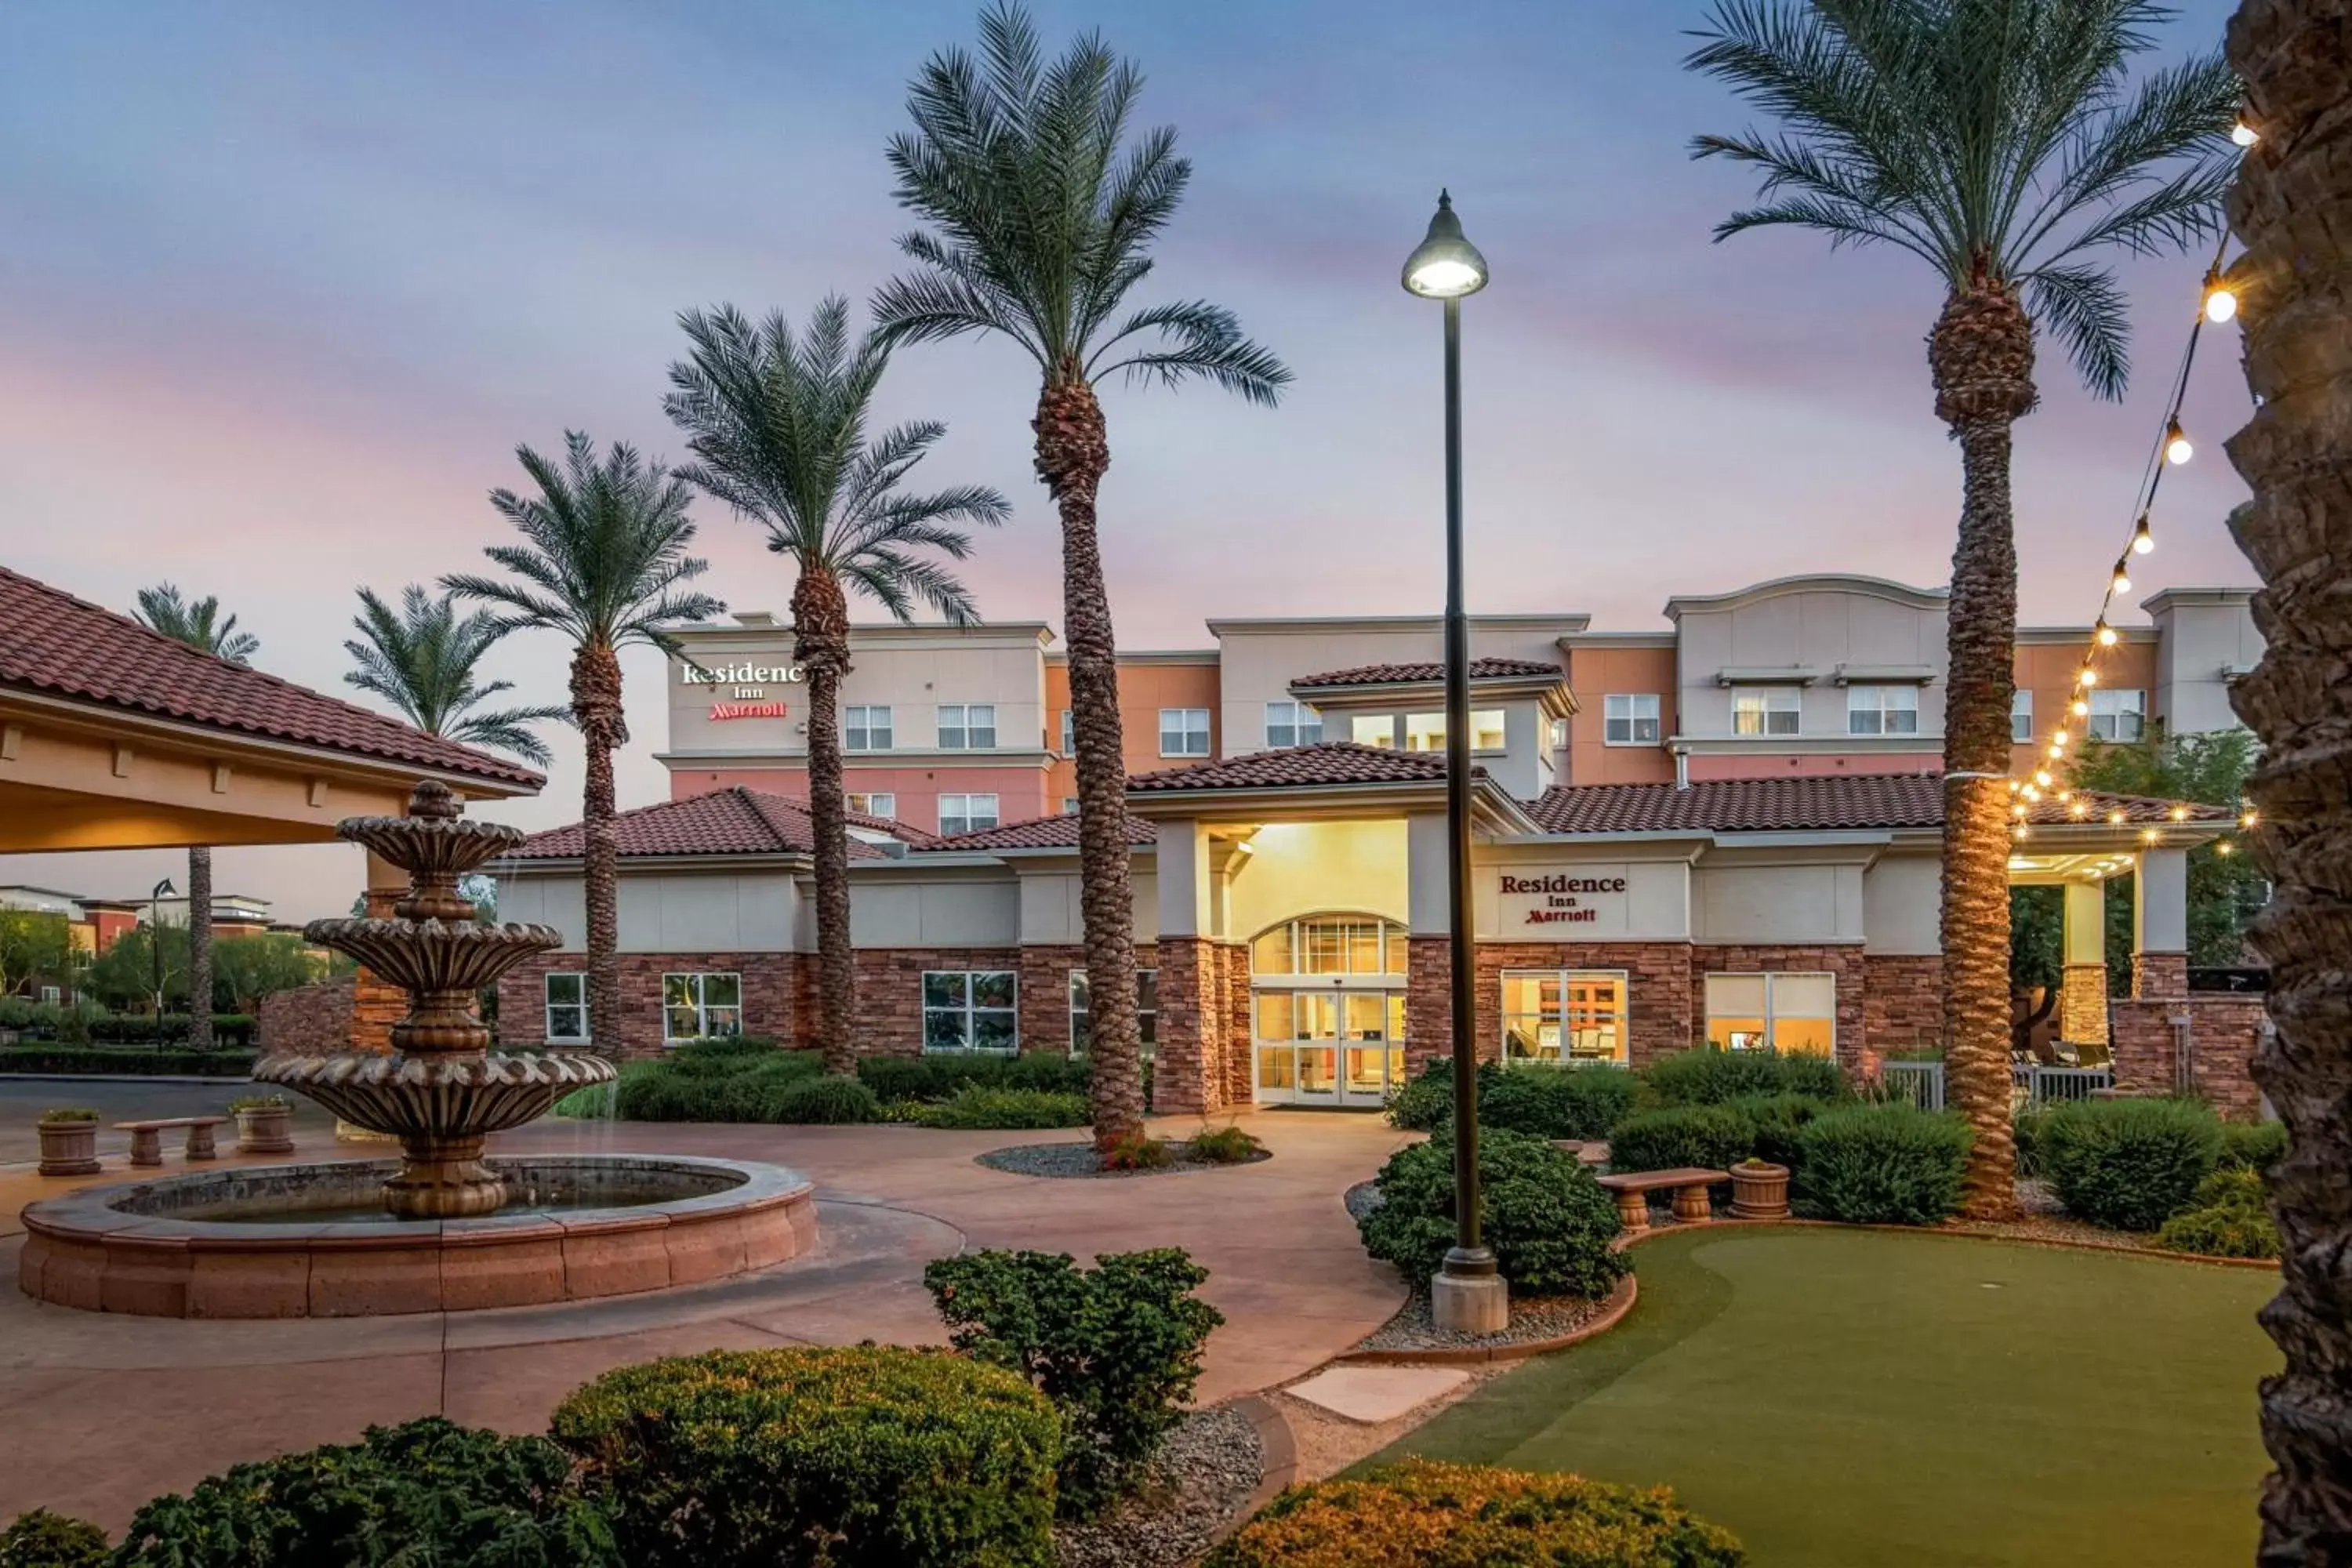 Property Building in Residence Inn Phoenix Glendale Sports & Entertainment District